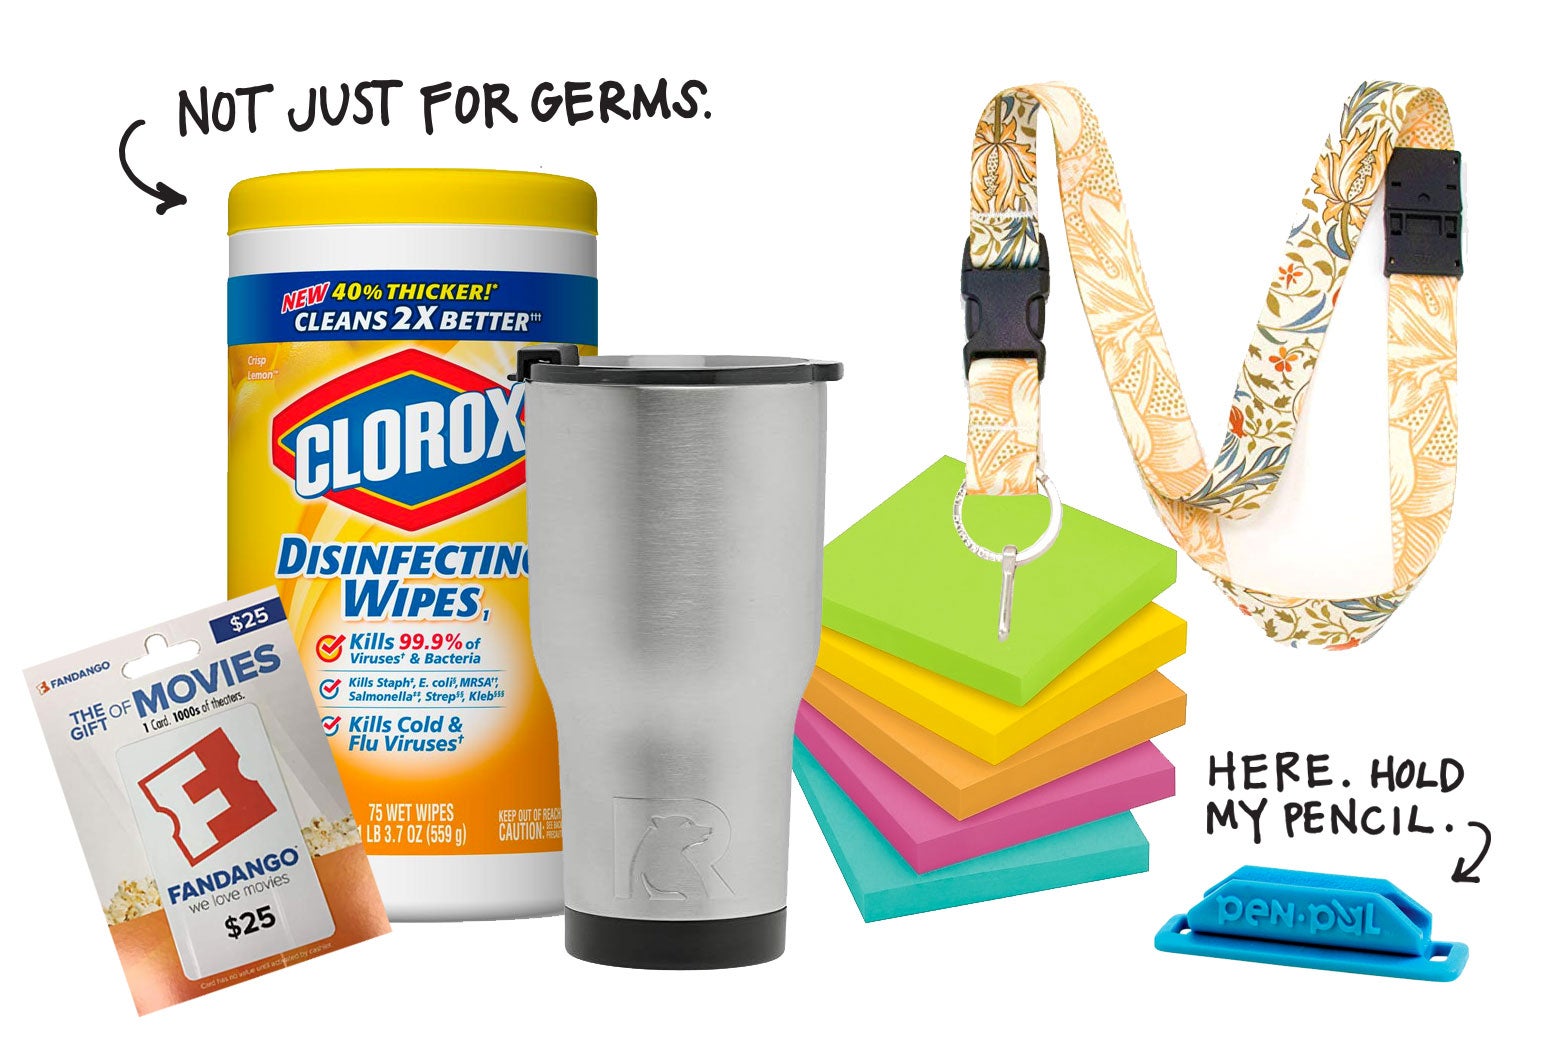 Clorox wipes, a gift card to Fandango, a stainless tumbler, Post-It Notes, a lanyard, and a pencil grip.